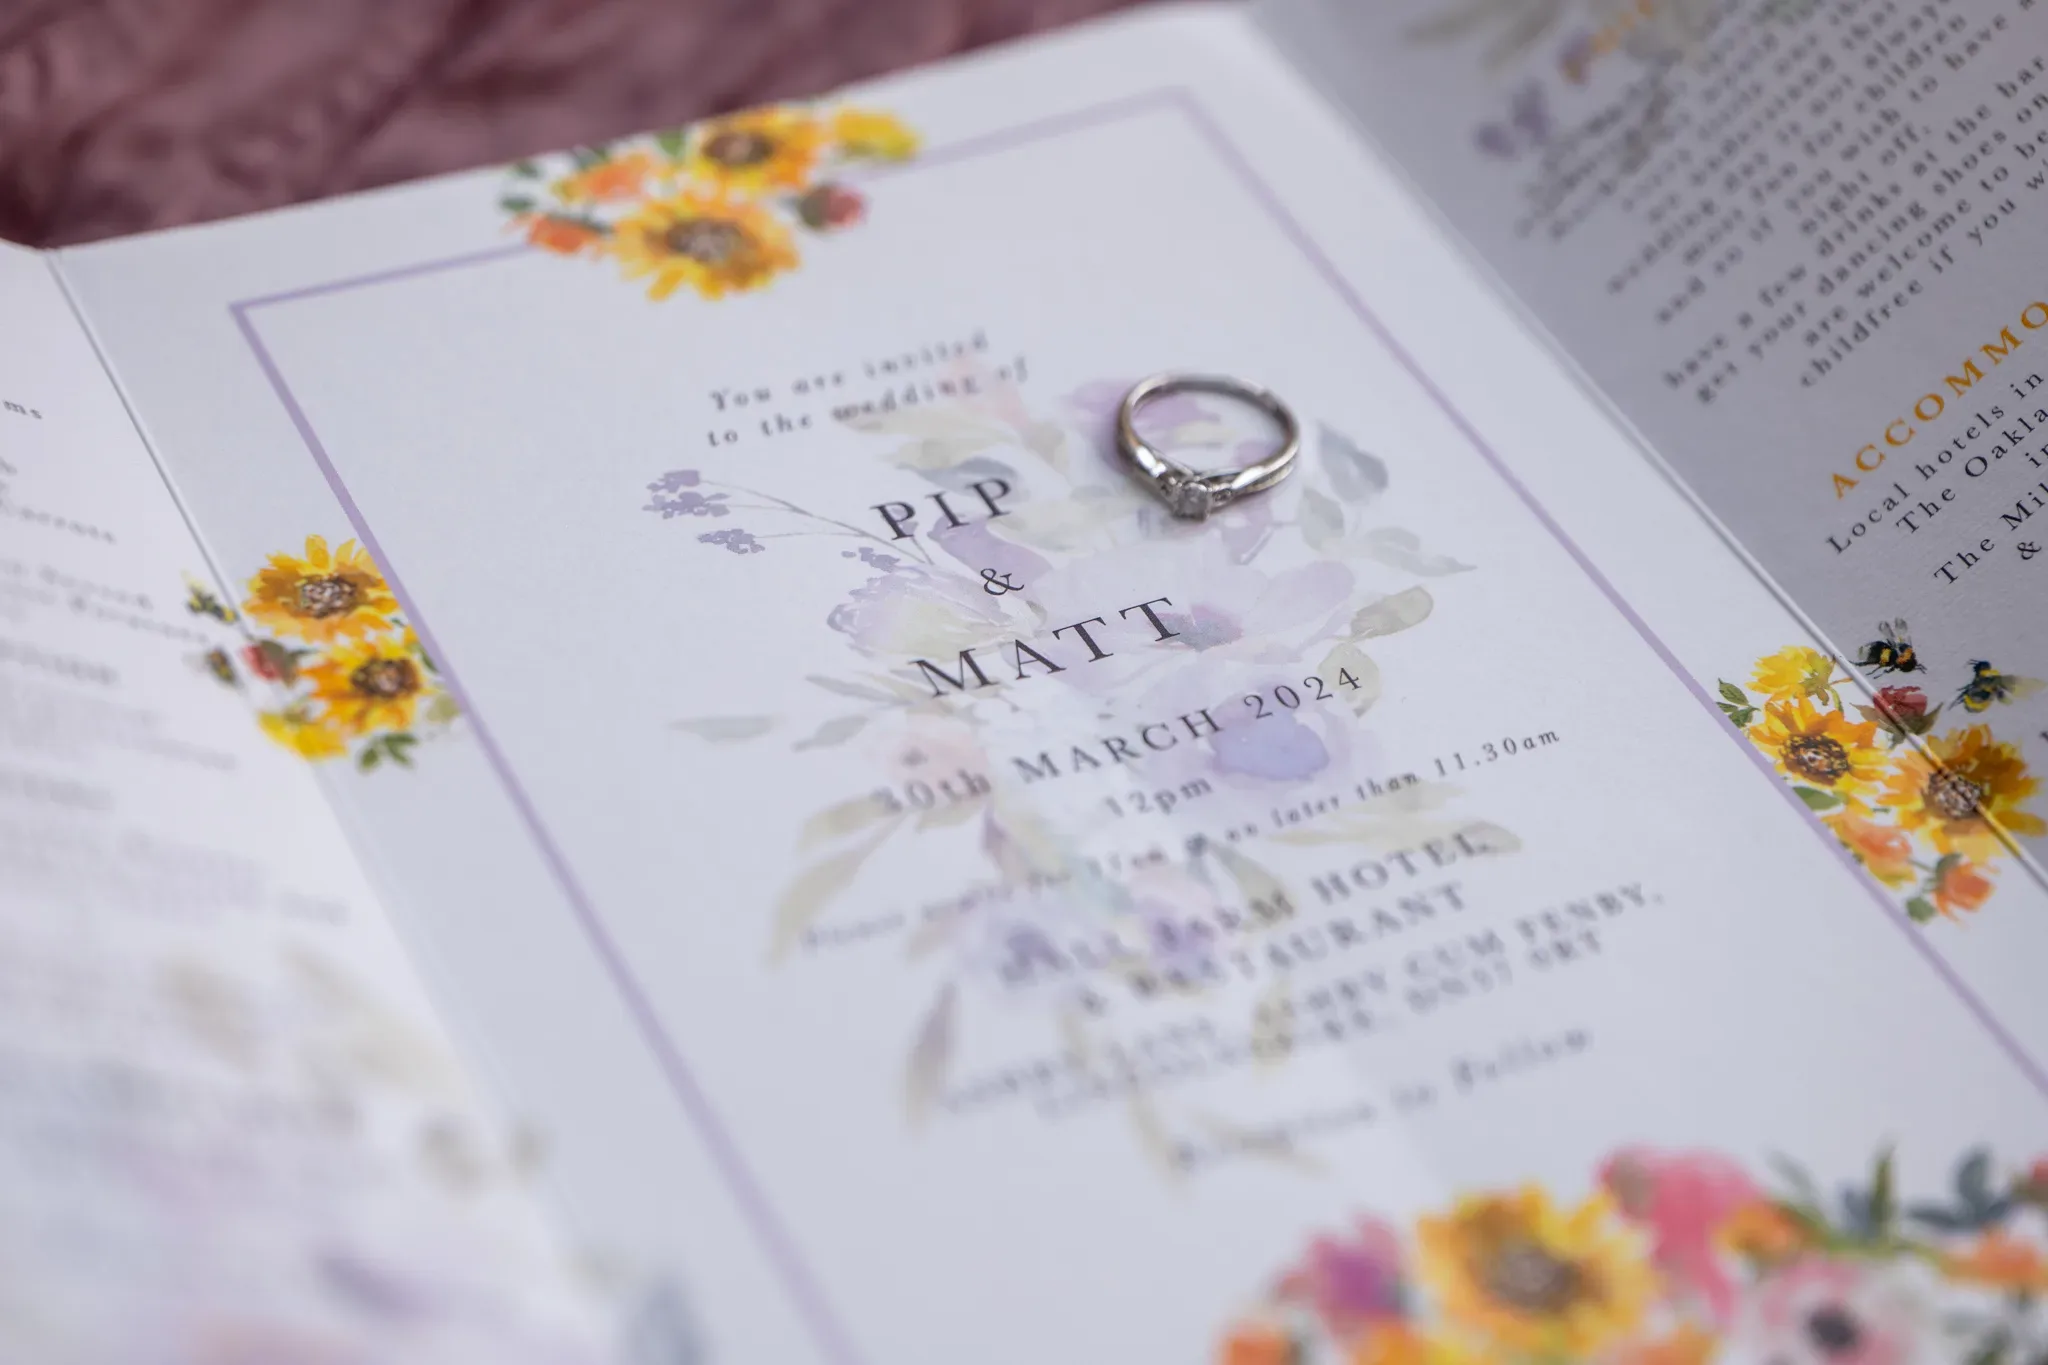 An elegant wedding invitation featuring floral designs with a pair of rings resting on the names "pip & mat," highlighting a special date in march 2024.